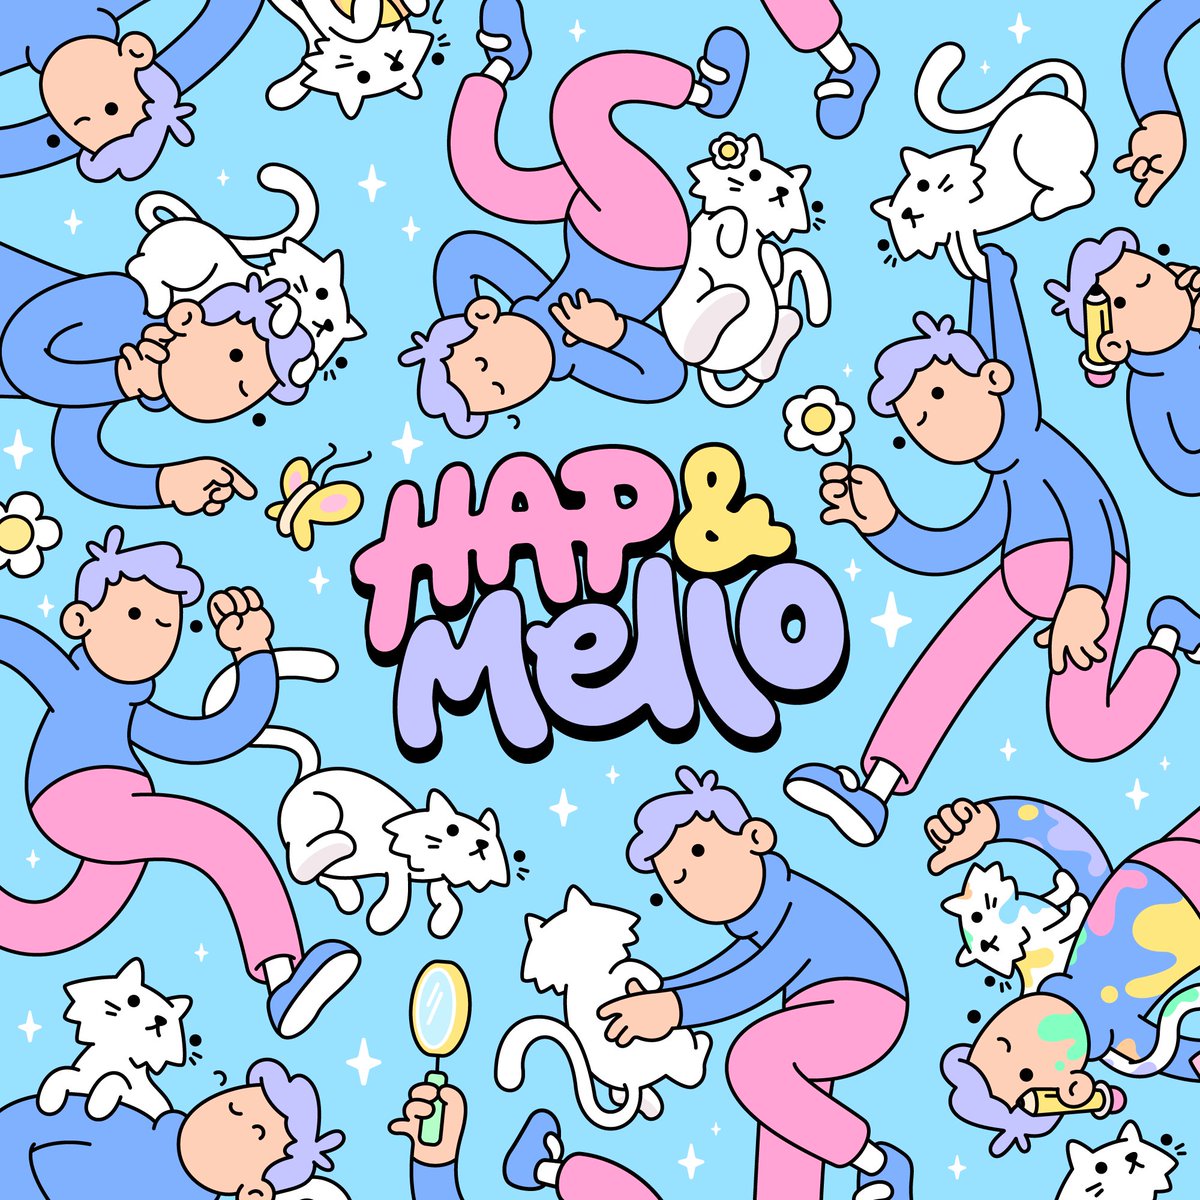 Mark your calendars! Our first Hap & Mello Capsule Collection is launching exclusively at our ComplexCon pavilion on November 18th and online November 27th!